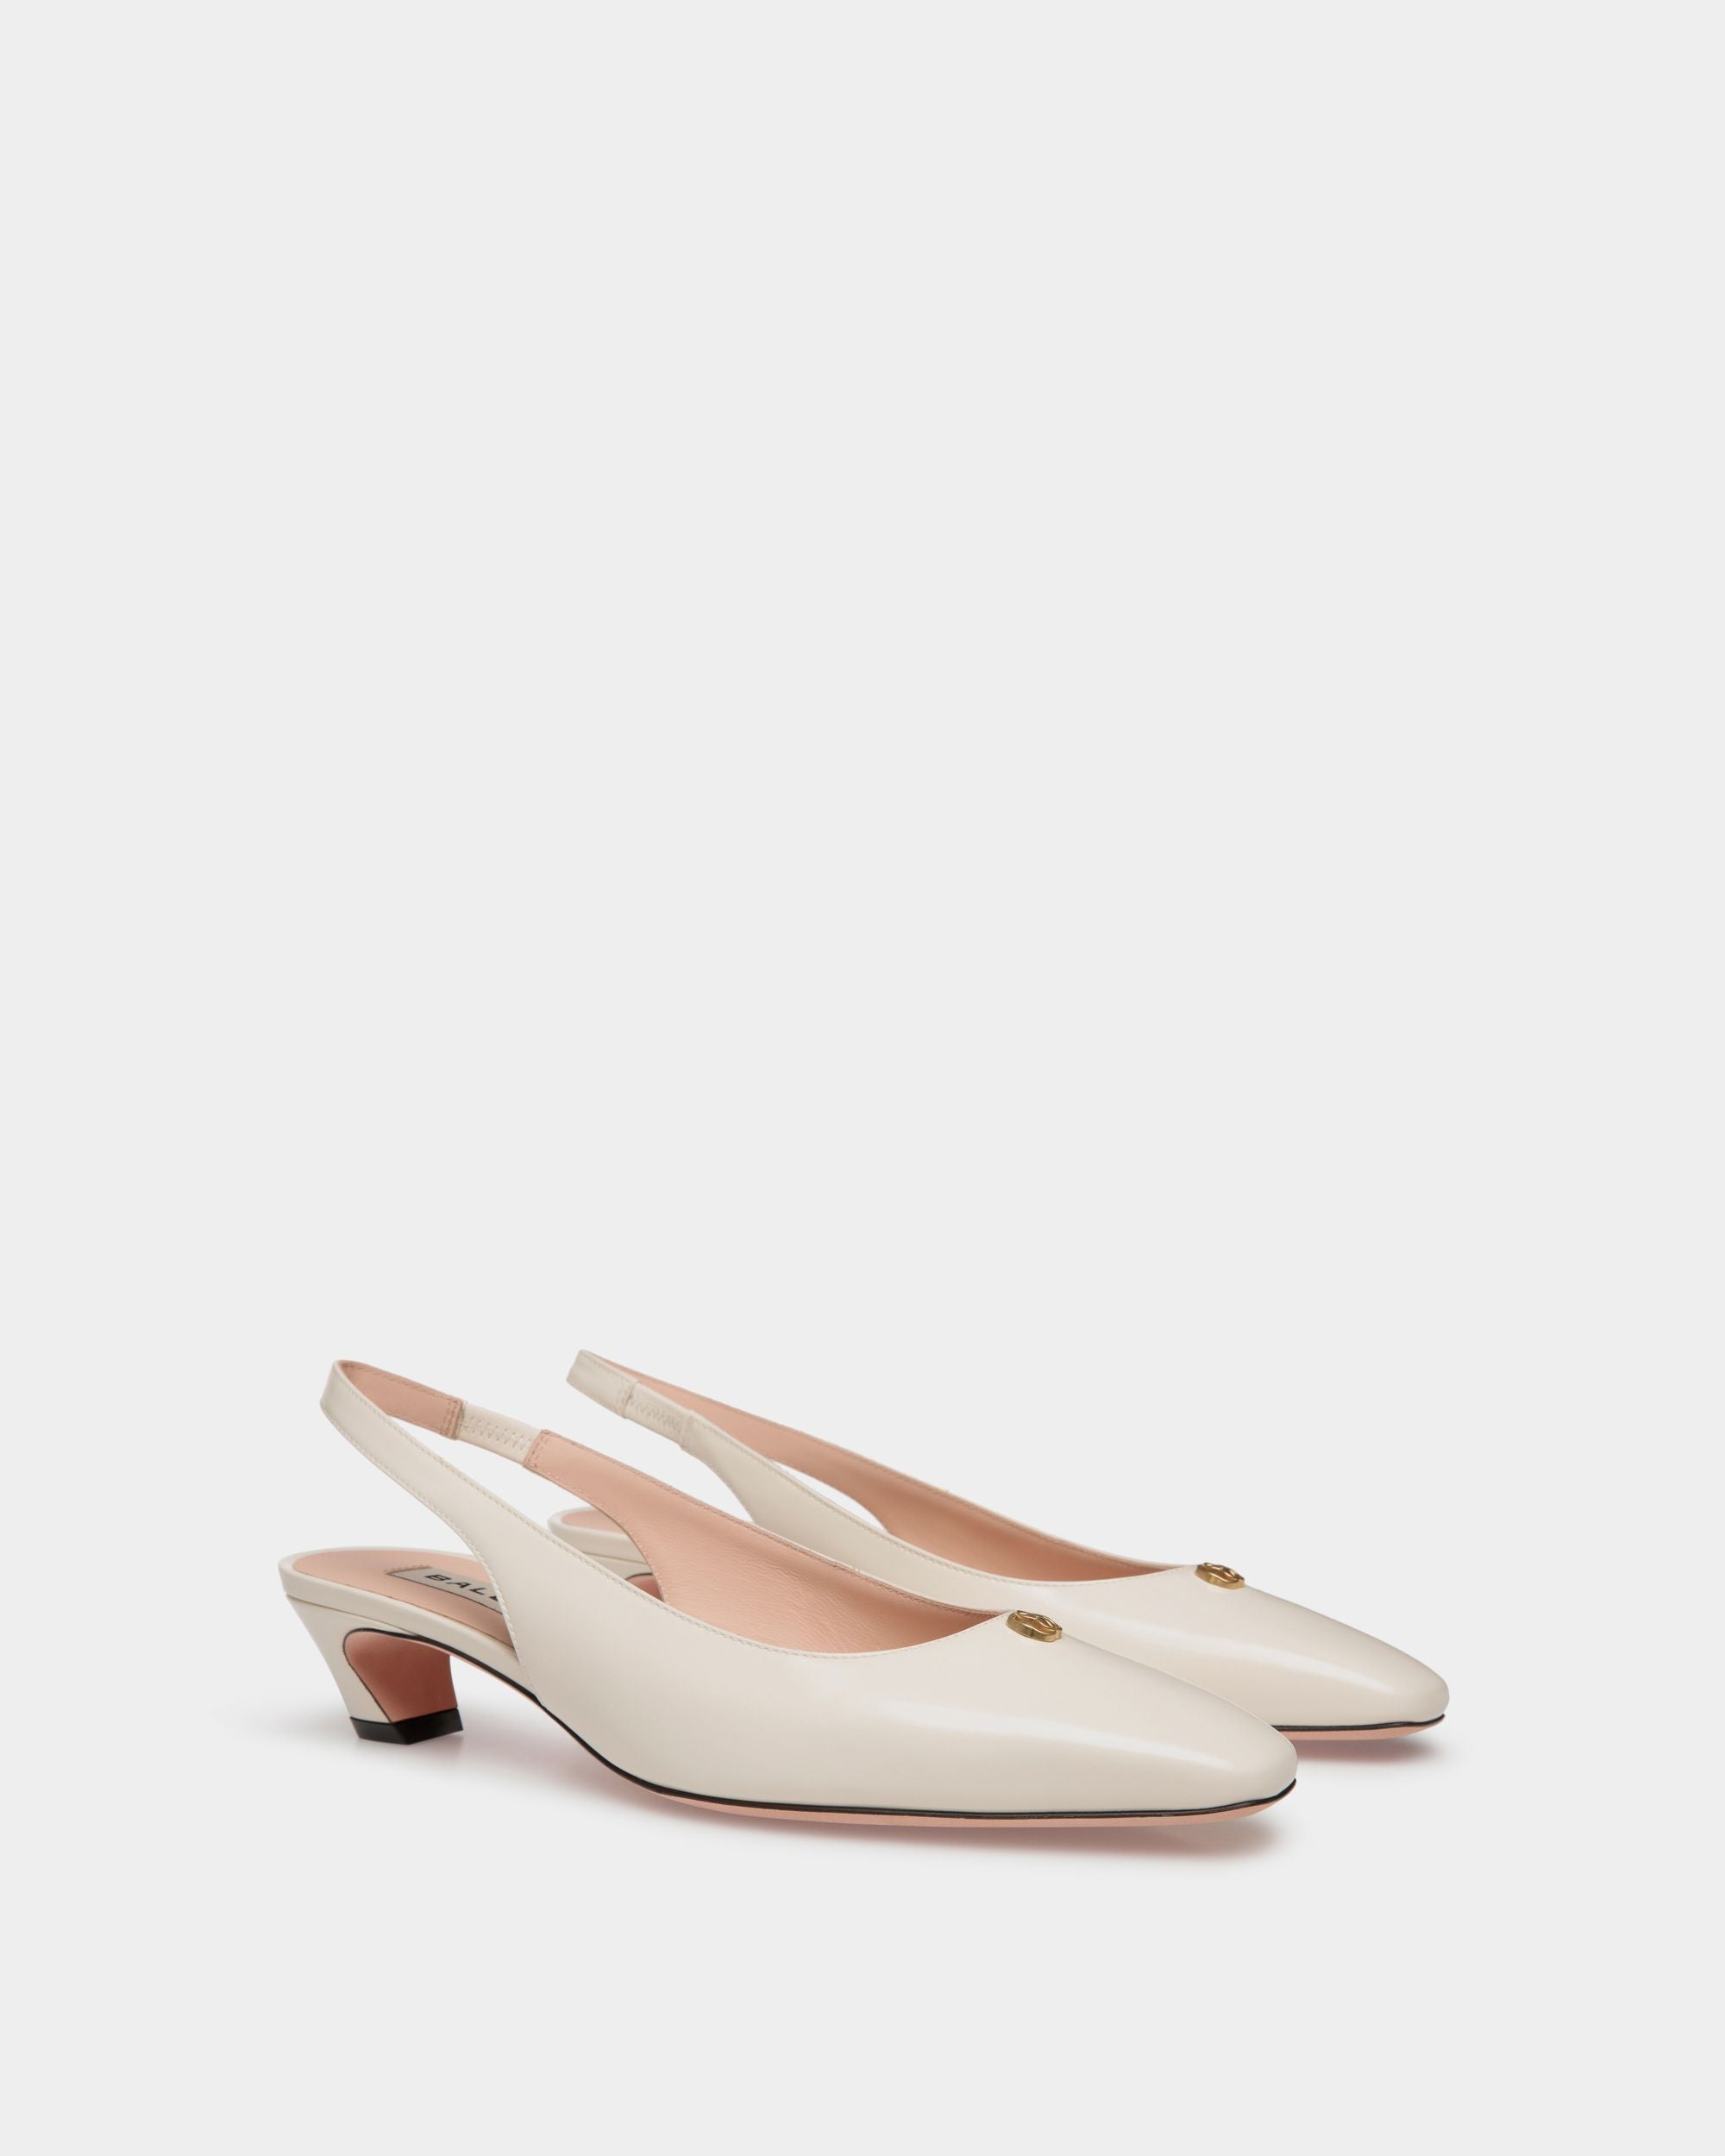 Sylt | Women's Slingback Pump in White Leather | Bally | Still Life 3/4 Front